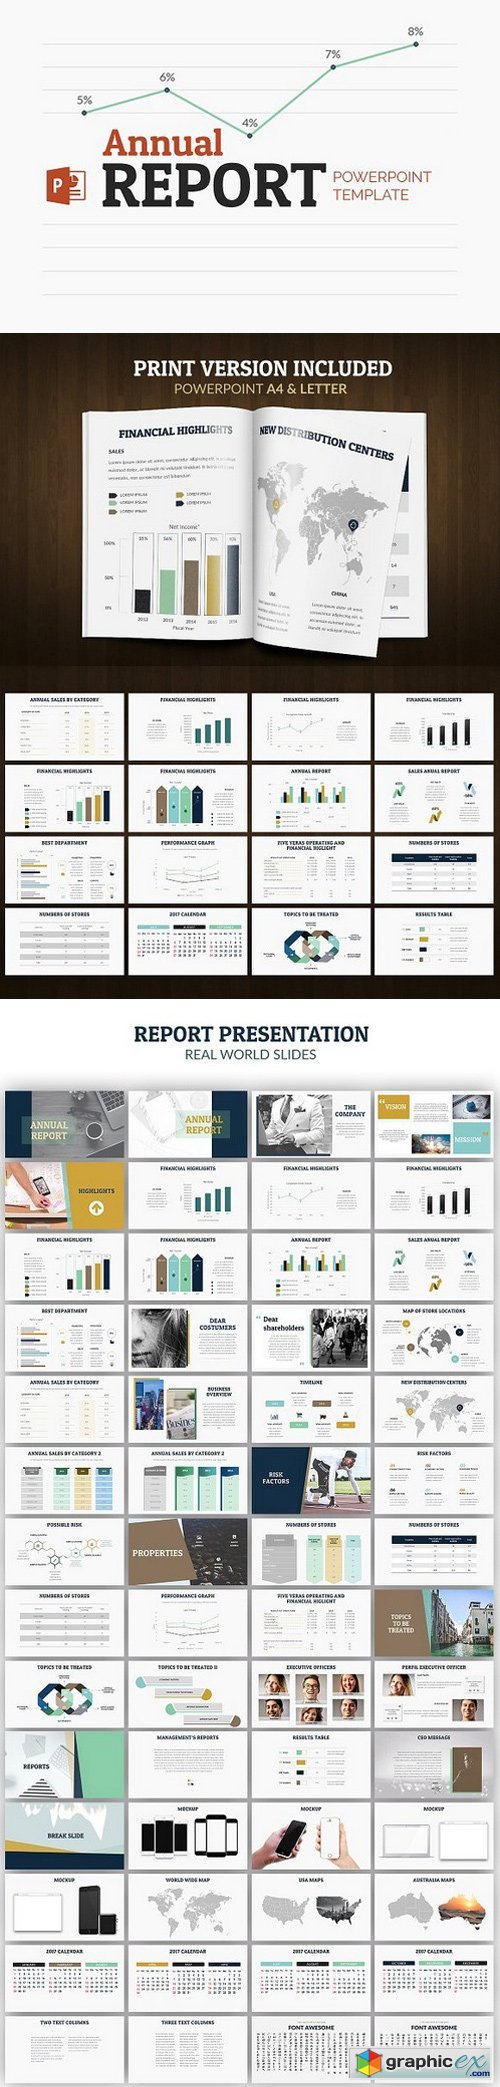 Annual Report |Powerpoint + A4 Print